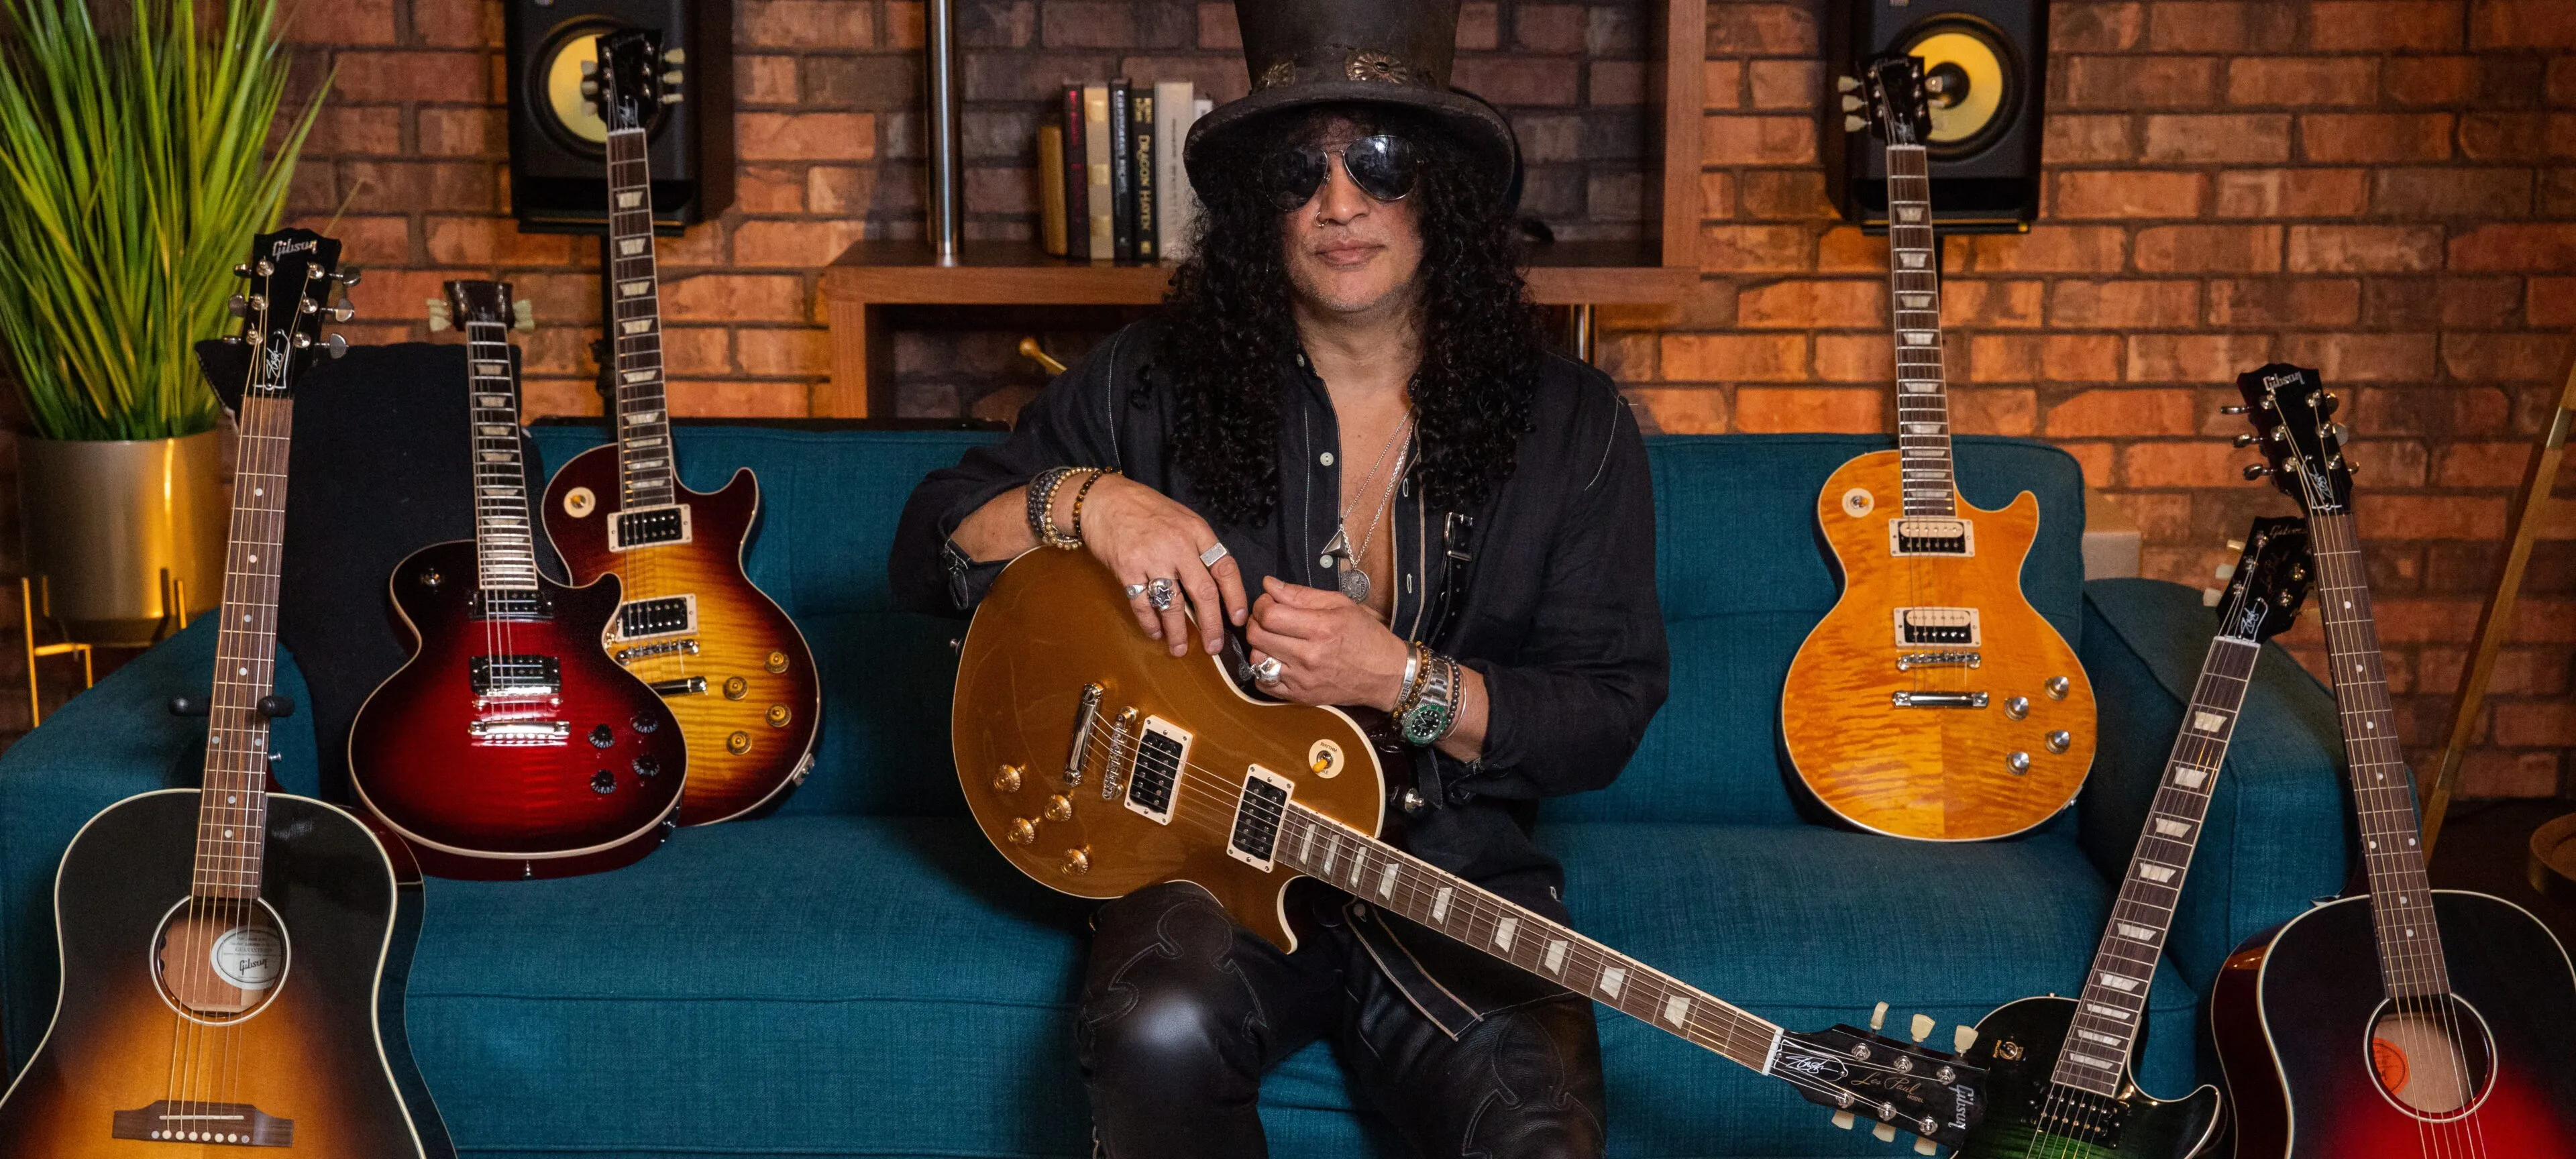 Take A Peek At The New Gibson Slash “Victoria” Les Paul Standard Goldtop, The Latest In The Gibson Slash Collection